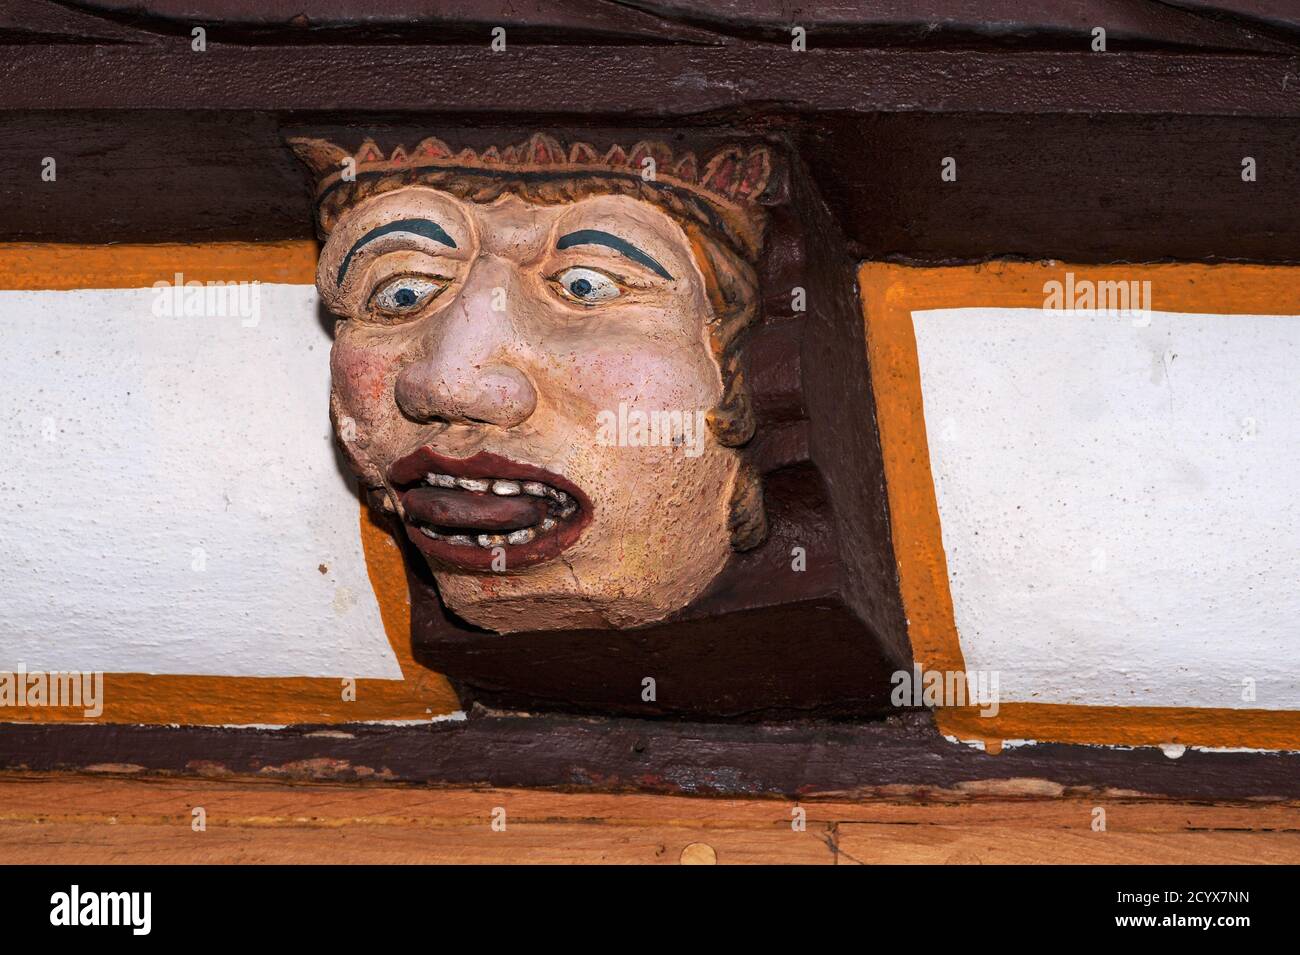 Gluttony, one of Christianity’s Seven Deadly Sins, represented in the sculpted end of a wooden ceiling beam protruding from the timber-framed Haus der Sieben Laster (House of the Seven Vices) at Brückengasse 9 in Limburg an der Lahn, Hesse, Germany.  The ancient house, rebuilt in 1567, served as a family home, a provisions shop, an ironmongery and a shoe shop before being renovated in the modern era and opened to the public as a museum. Stock Photo